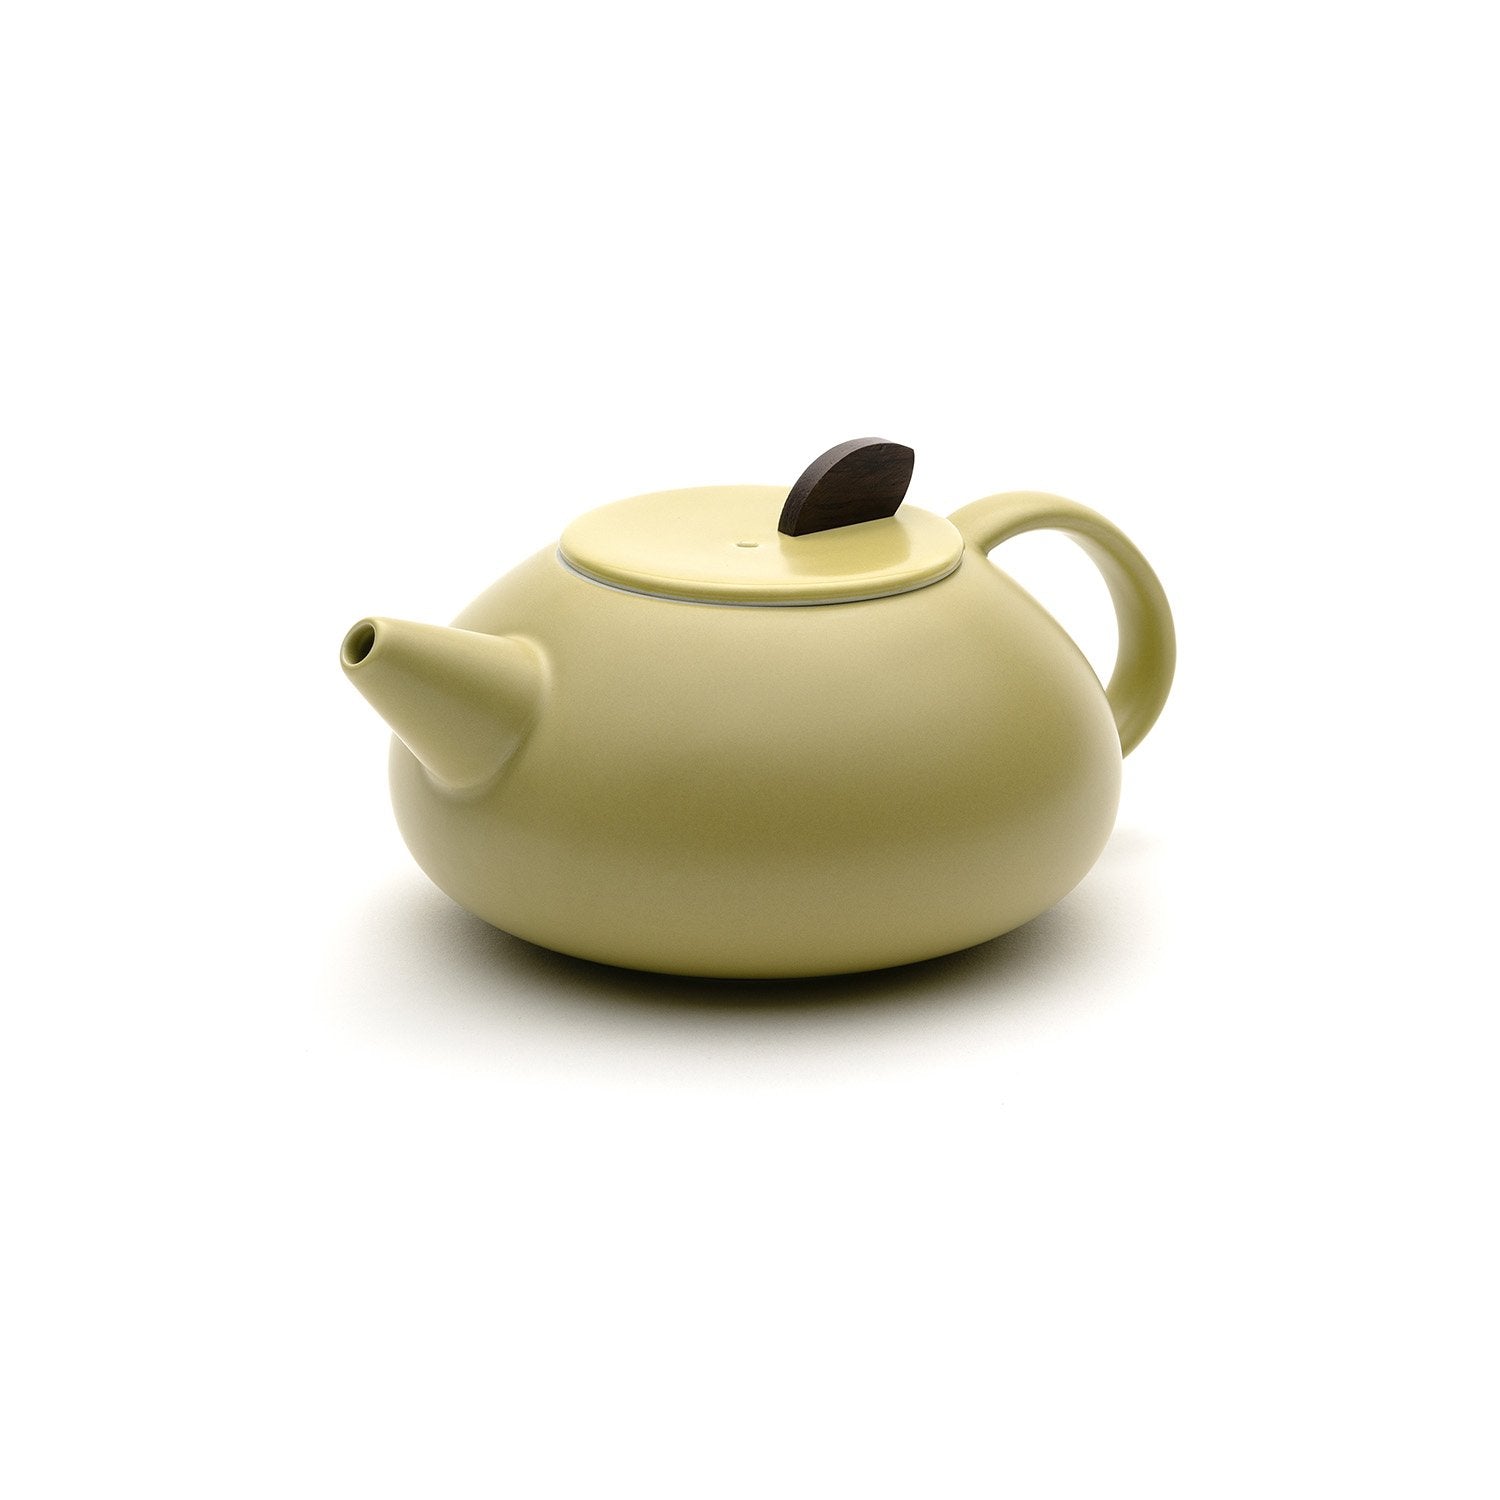 Olive small teapot